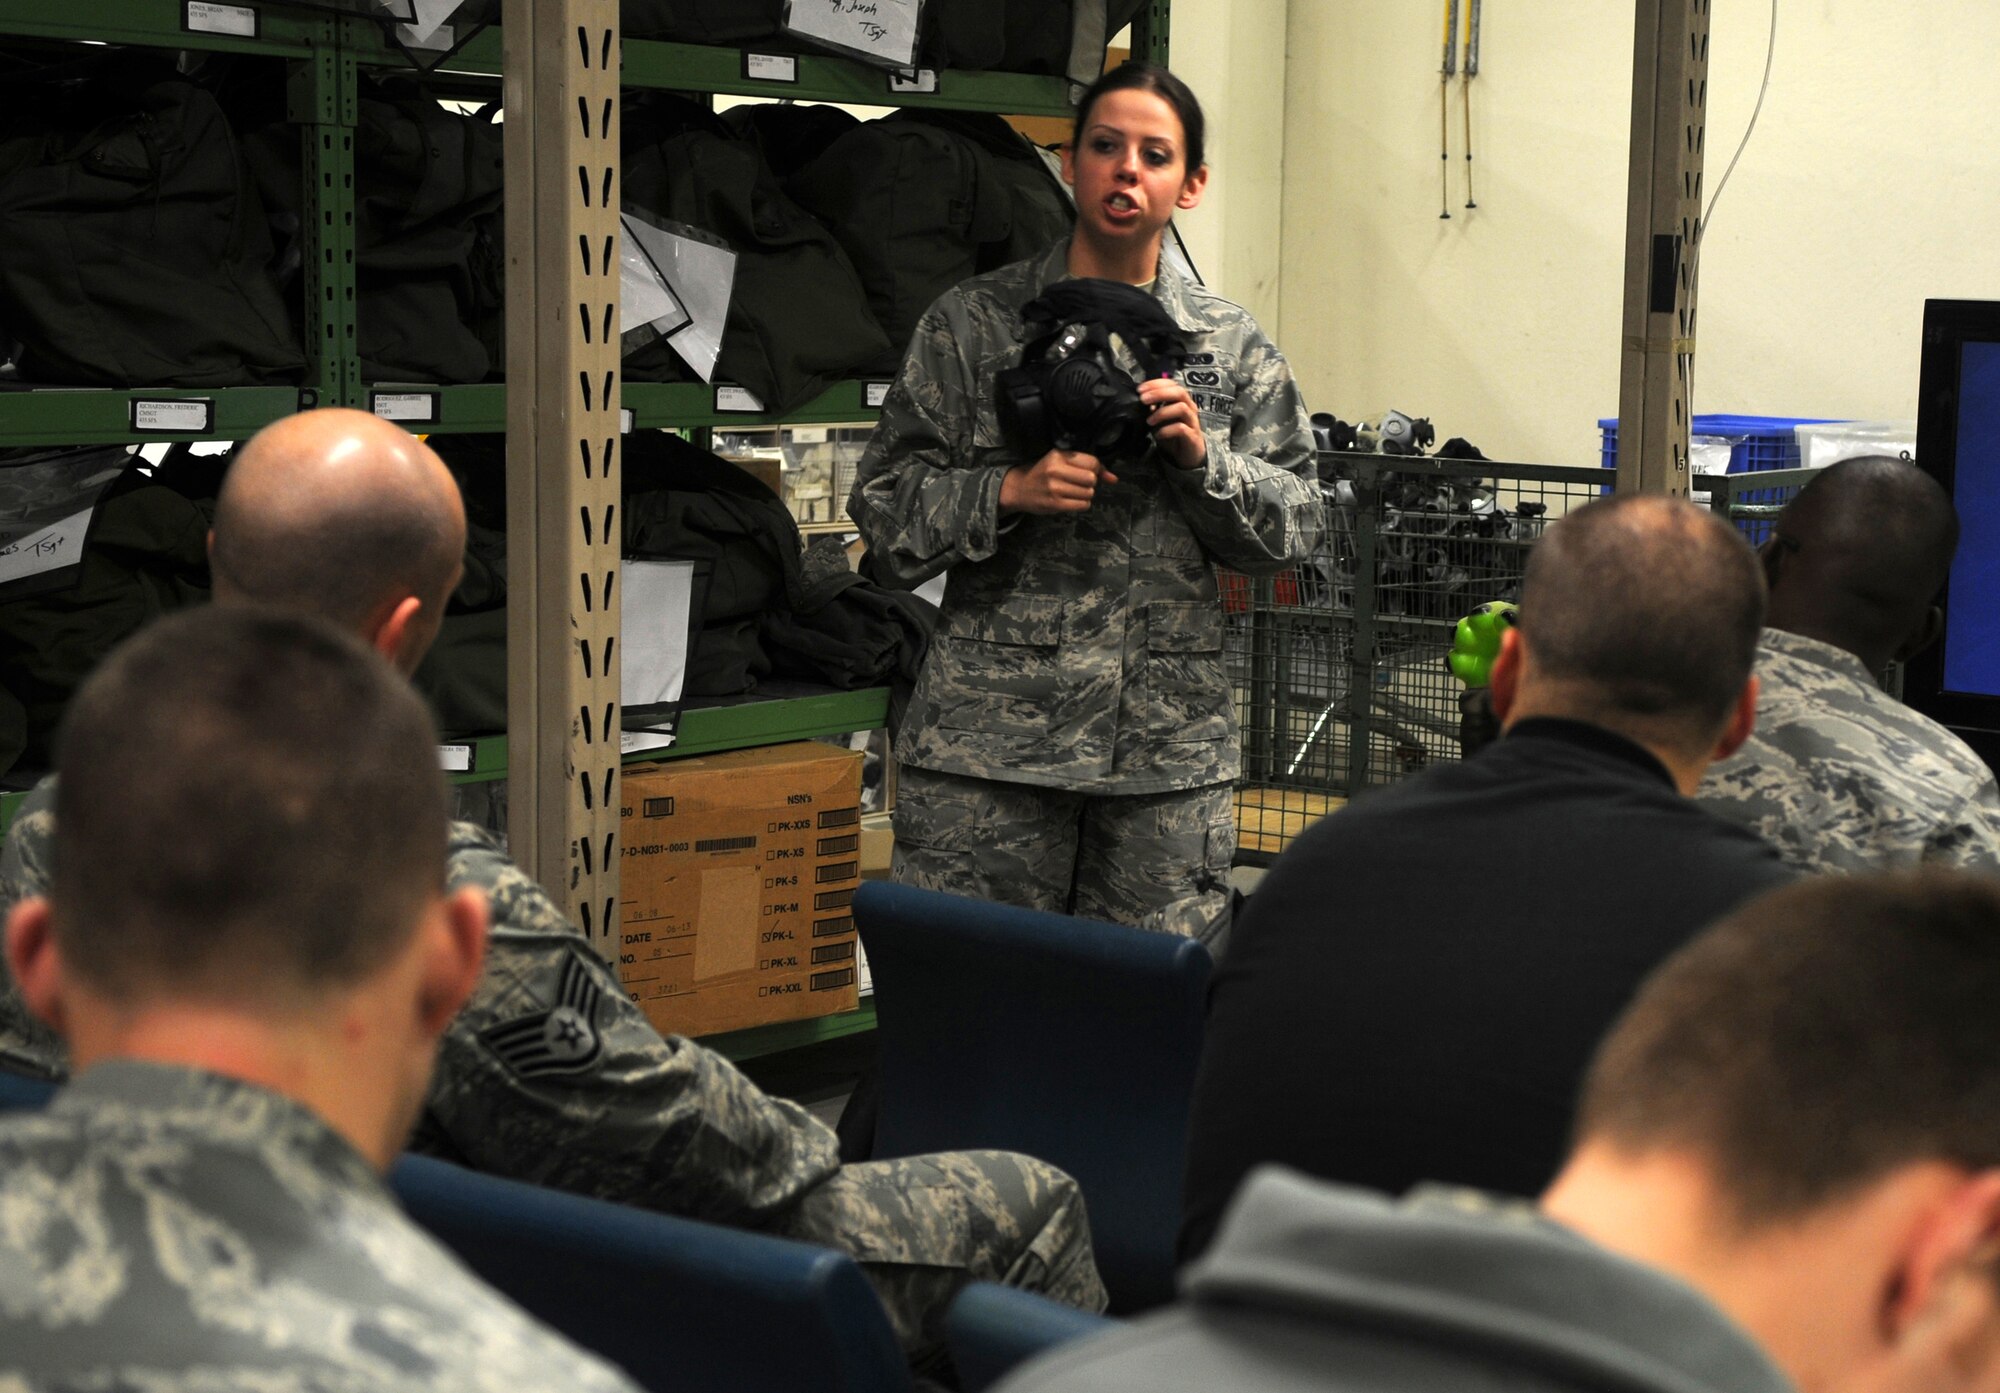 U.S. Air Force Airman 1st Class Renee Malsom, 886th Civil Engineer Squadron, Ramstein Air Base, Germany, briefs a class on the proper usage of the new M50 protective mask, November 09, 2009.  The M50 protective mask will be replacing the MCU-2P protective mask. (U.S. Air Force photo by Staff Sgt. Charity Barrett)